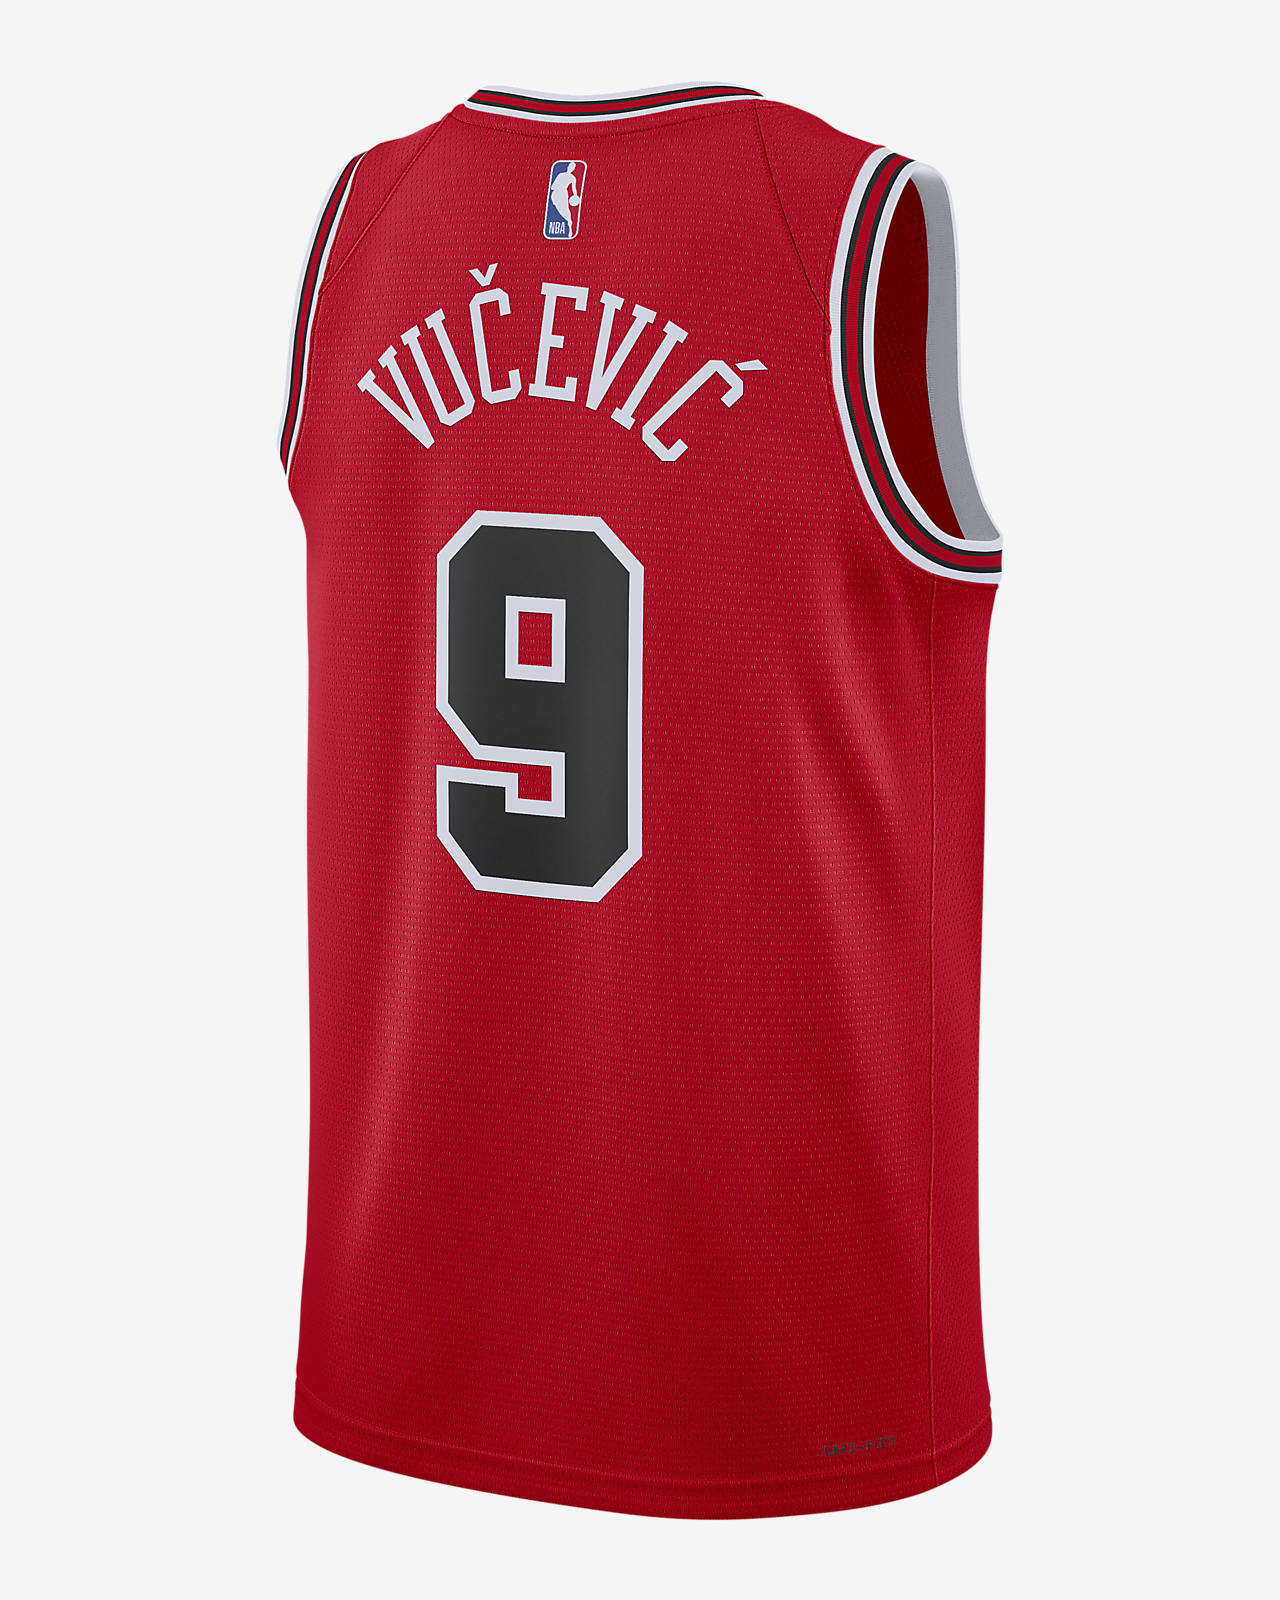 Whats the best looking jersey in the NBA and why is it the Bulls